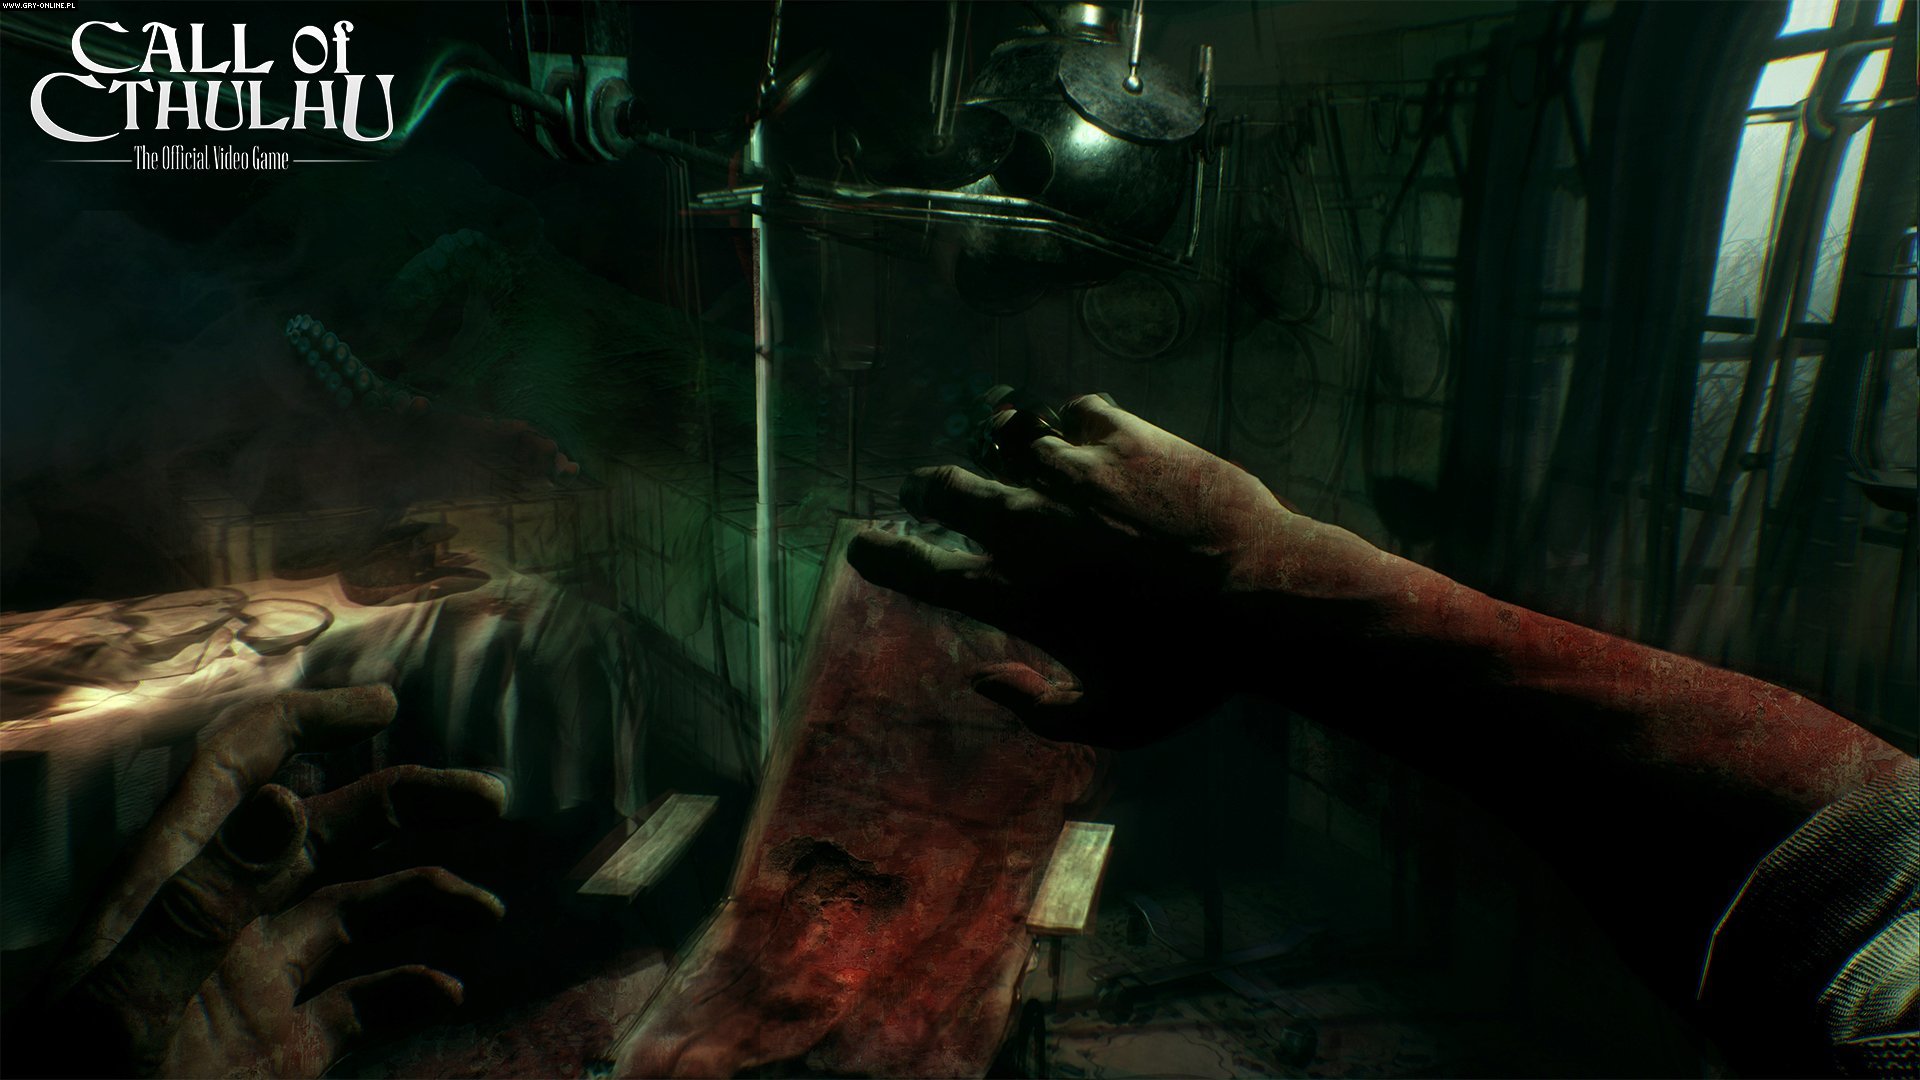 Call of Cthulhu PC Games Image 2/14, Cyanide Studio, Focus Home Interactive